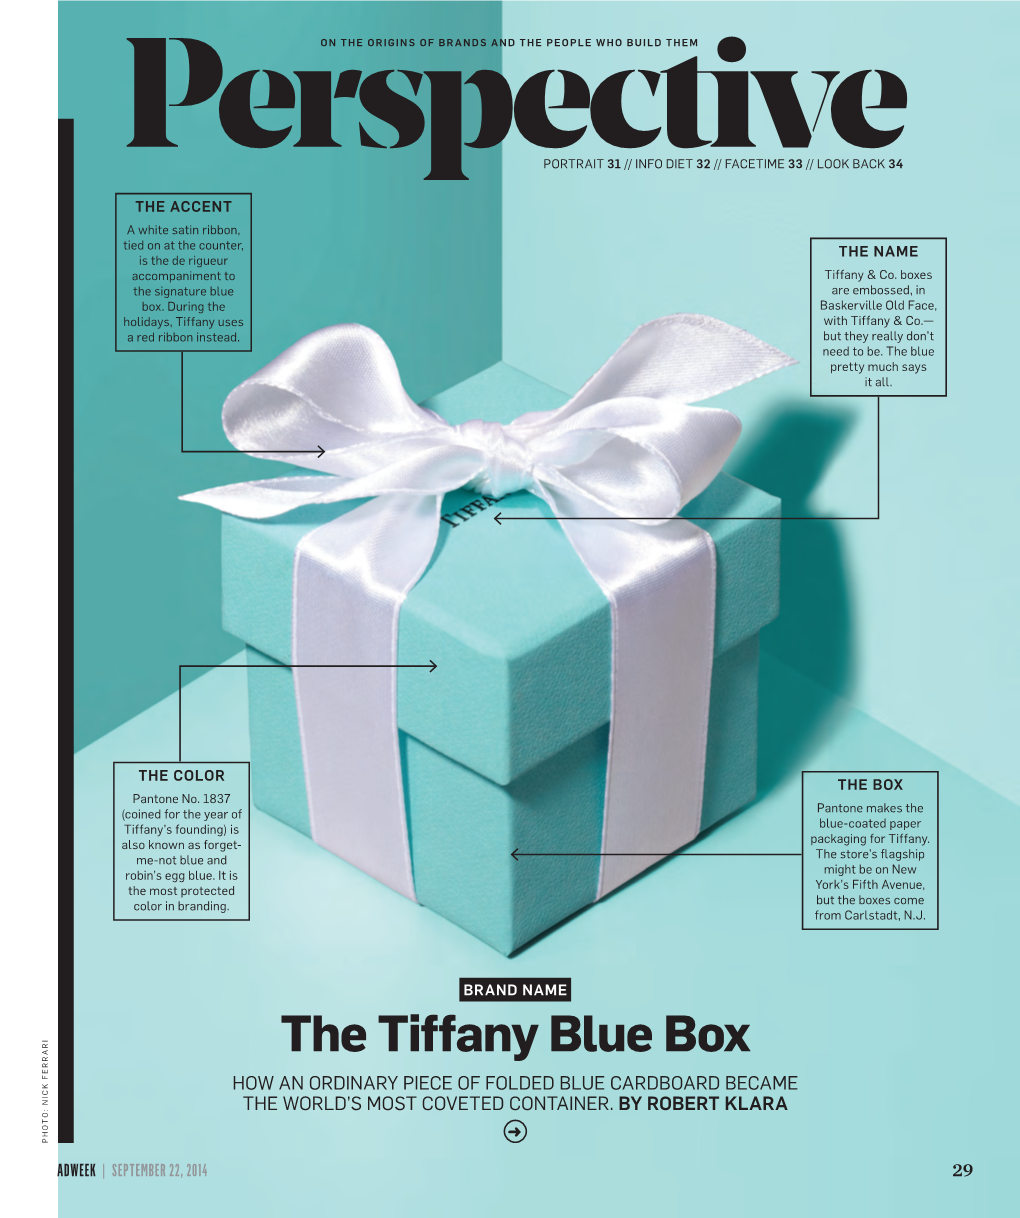 The Tiffany Blue Box HOW an ORDINARY PIECE of FOLDED BLUE CARDBOARD BECAME the WORLD’S MOST COVETED CONTAINER